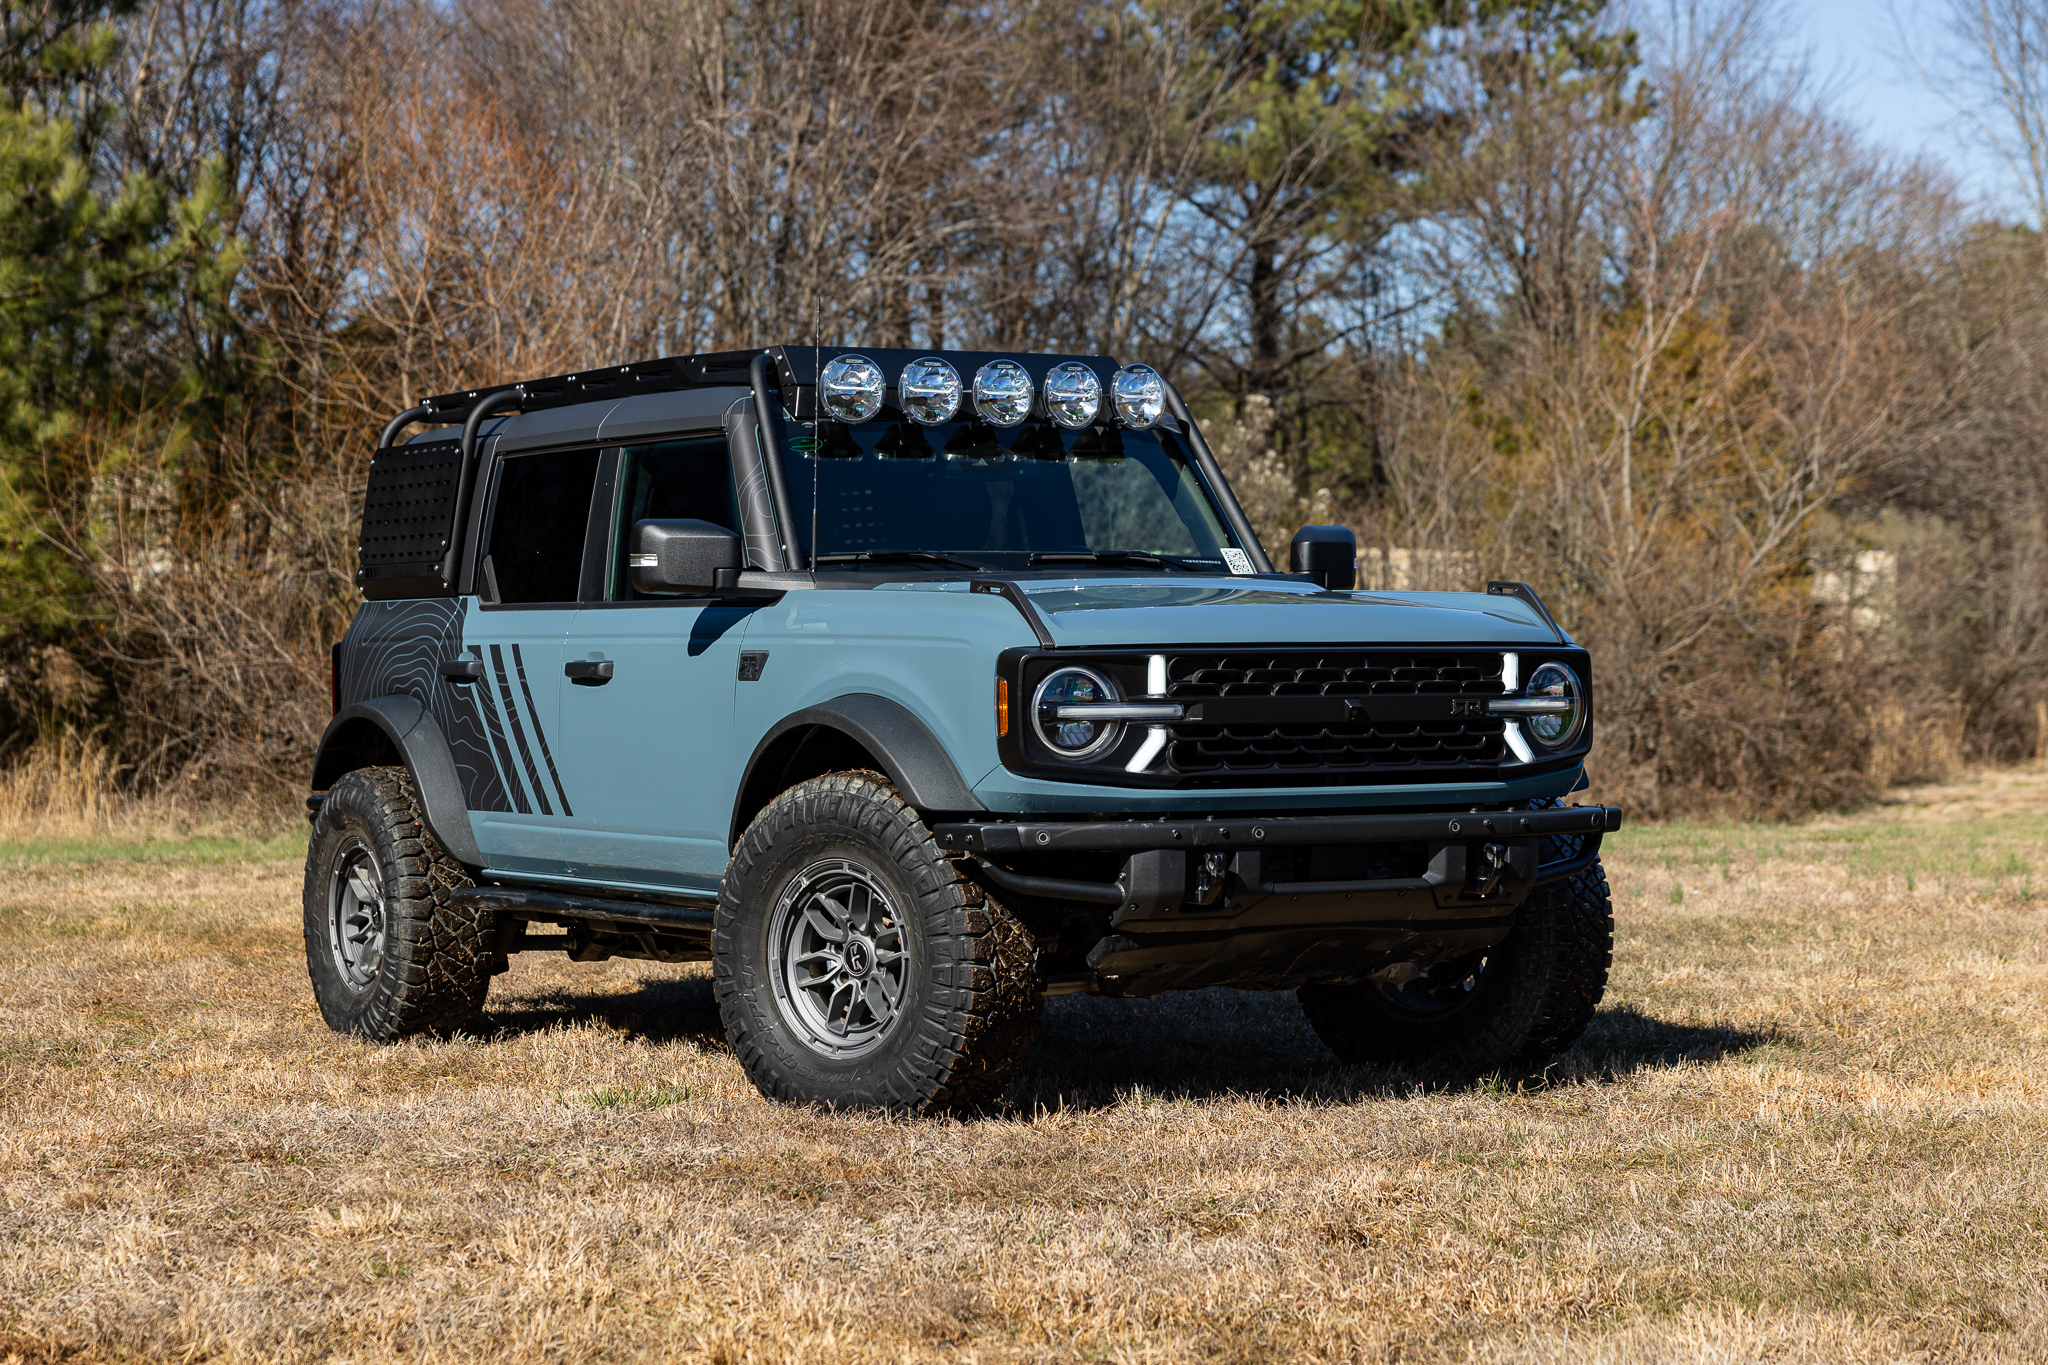 Ford Bronco Modular Roof Rack for 4-door, hard or soft top, Ford Bronco from RTR Vehicles! Bronco Meme